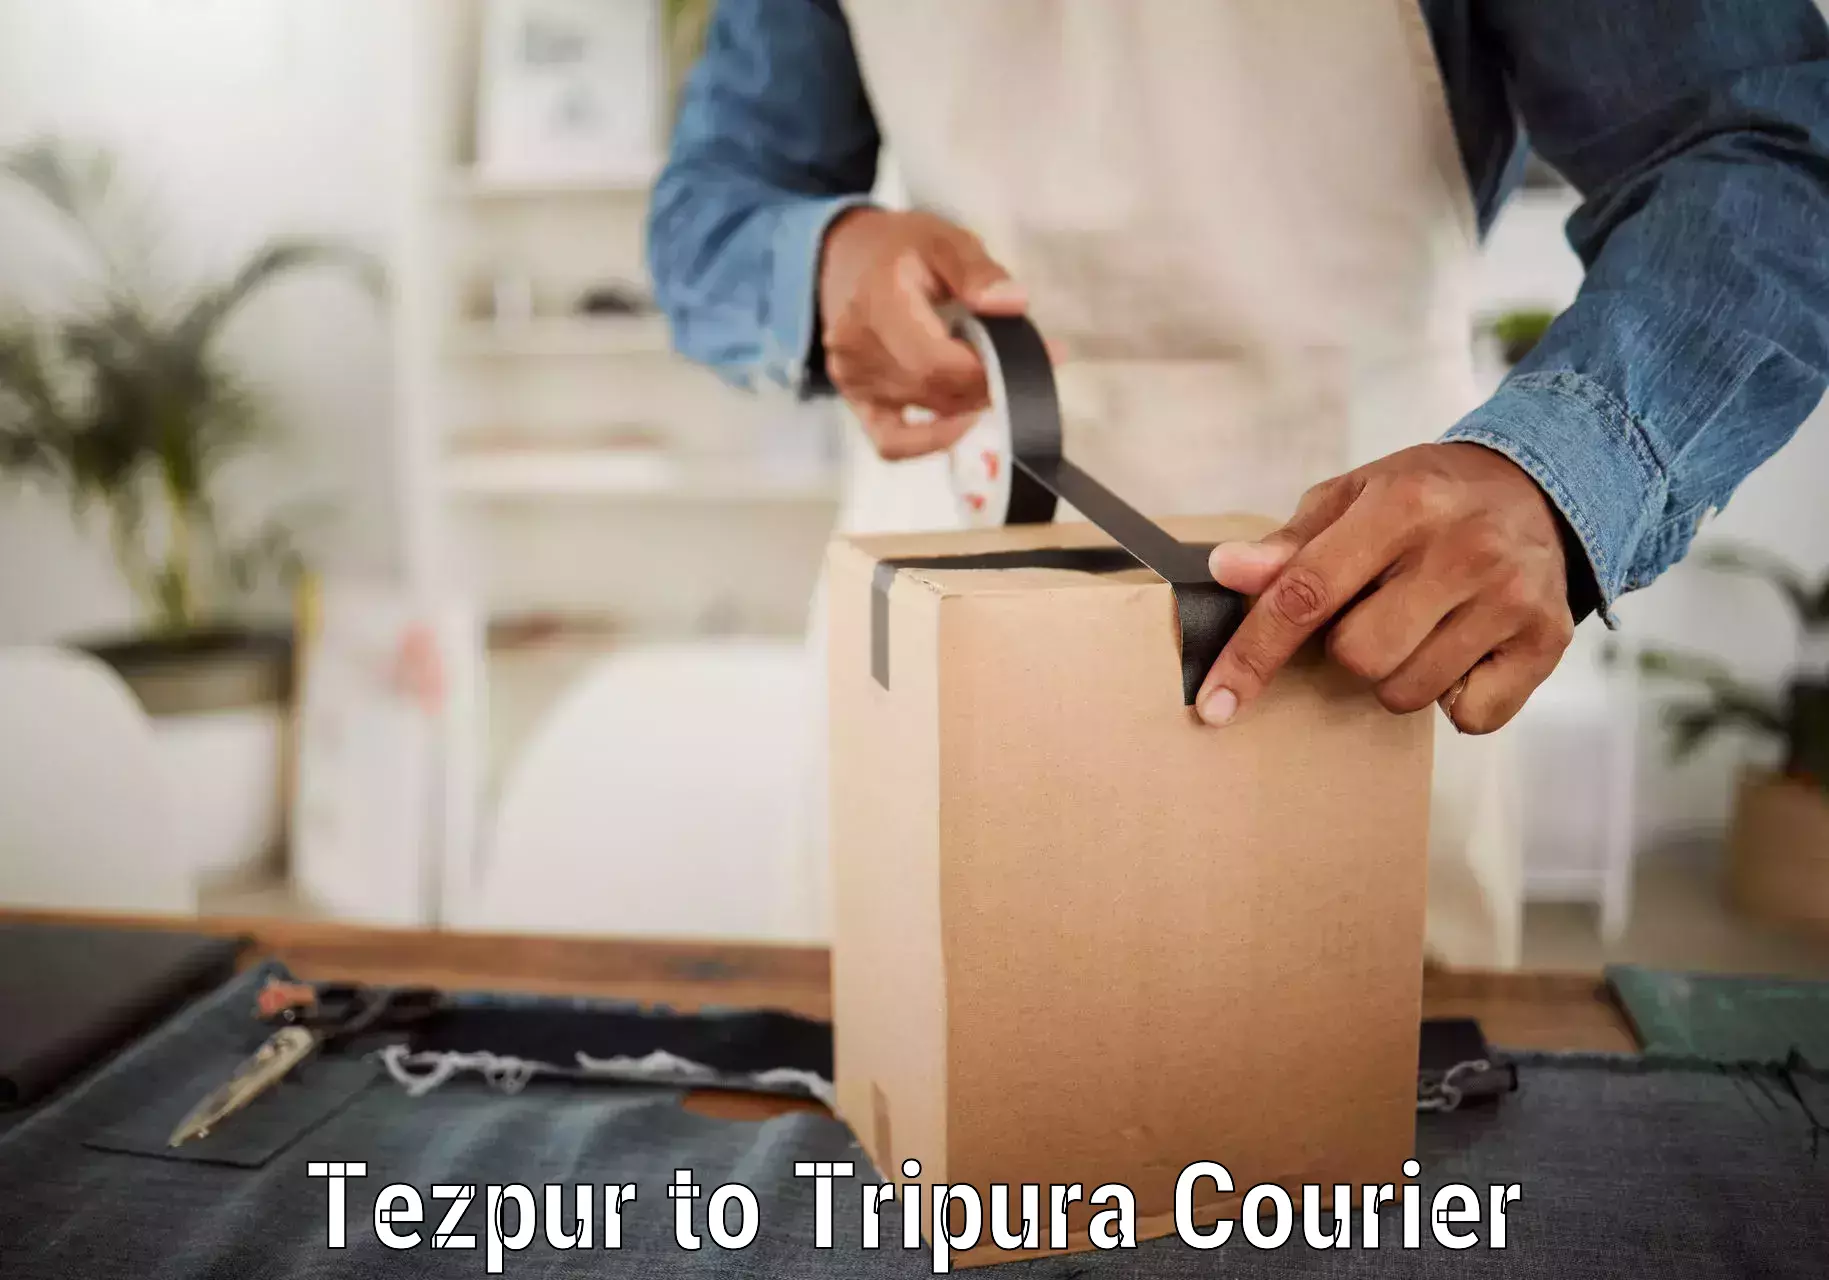 Efficient package consolidation Tezpur to Agartala